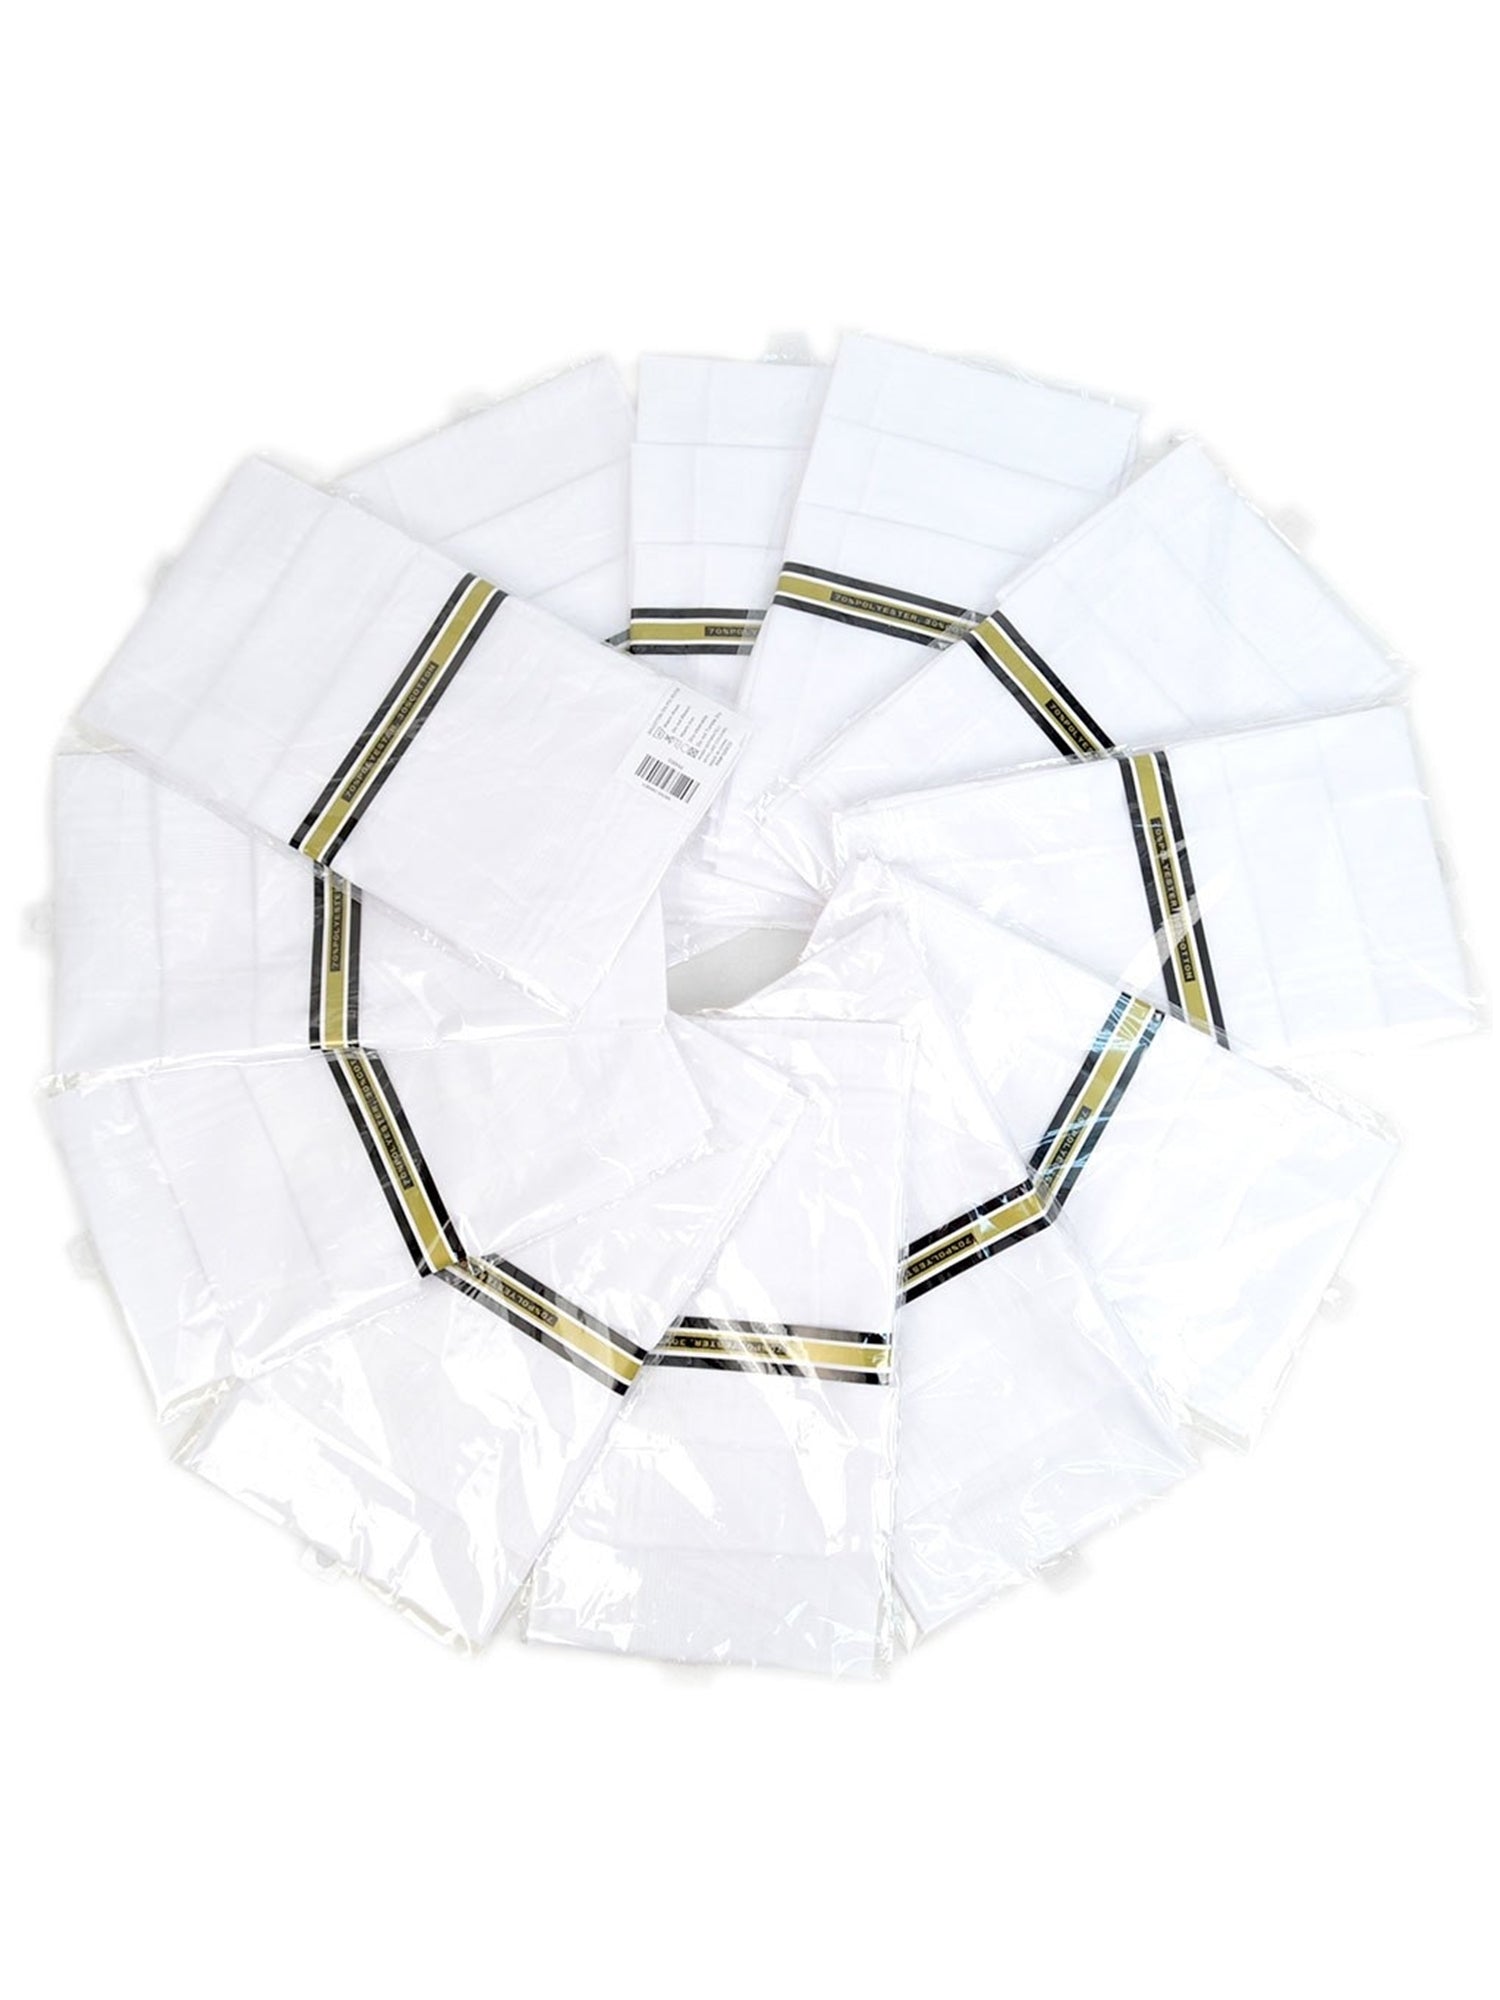 Men's White Cotton and Polyester Handkerchiefs Prefolded Pocket Squares TheDapperTie   